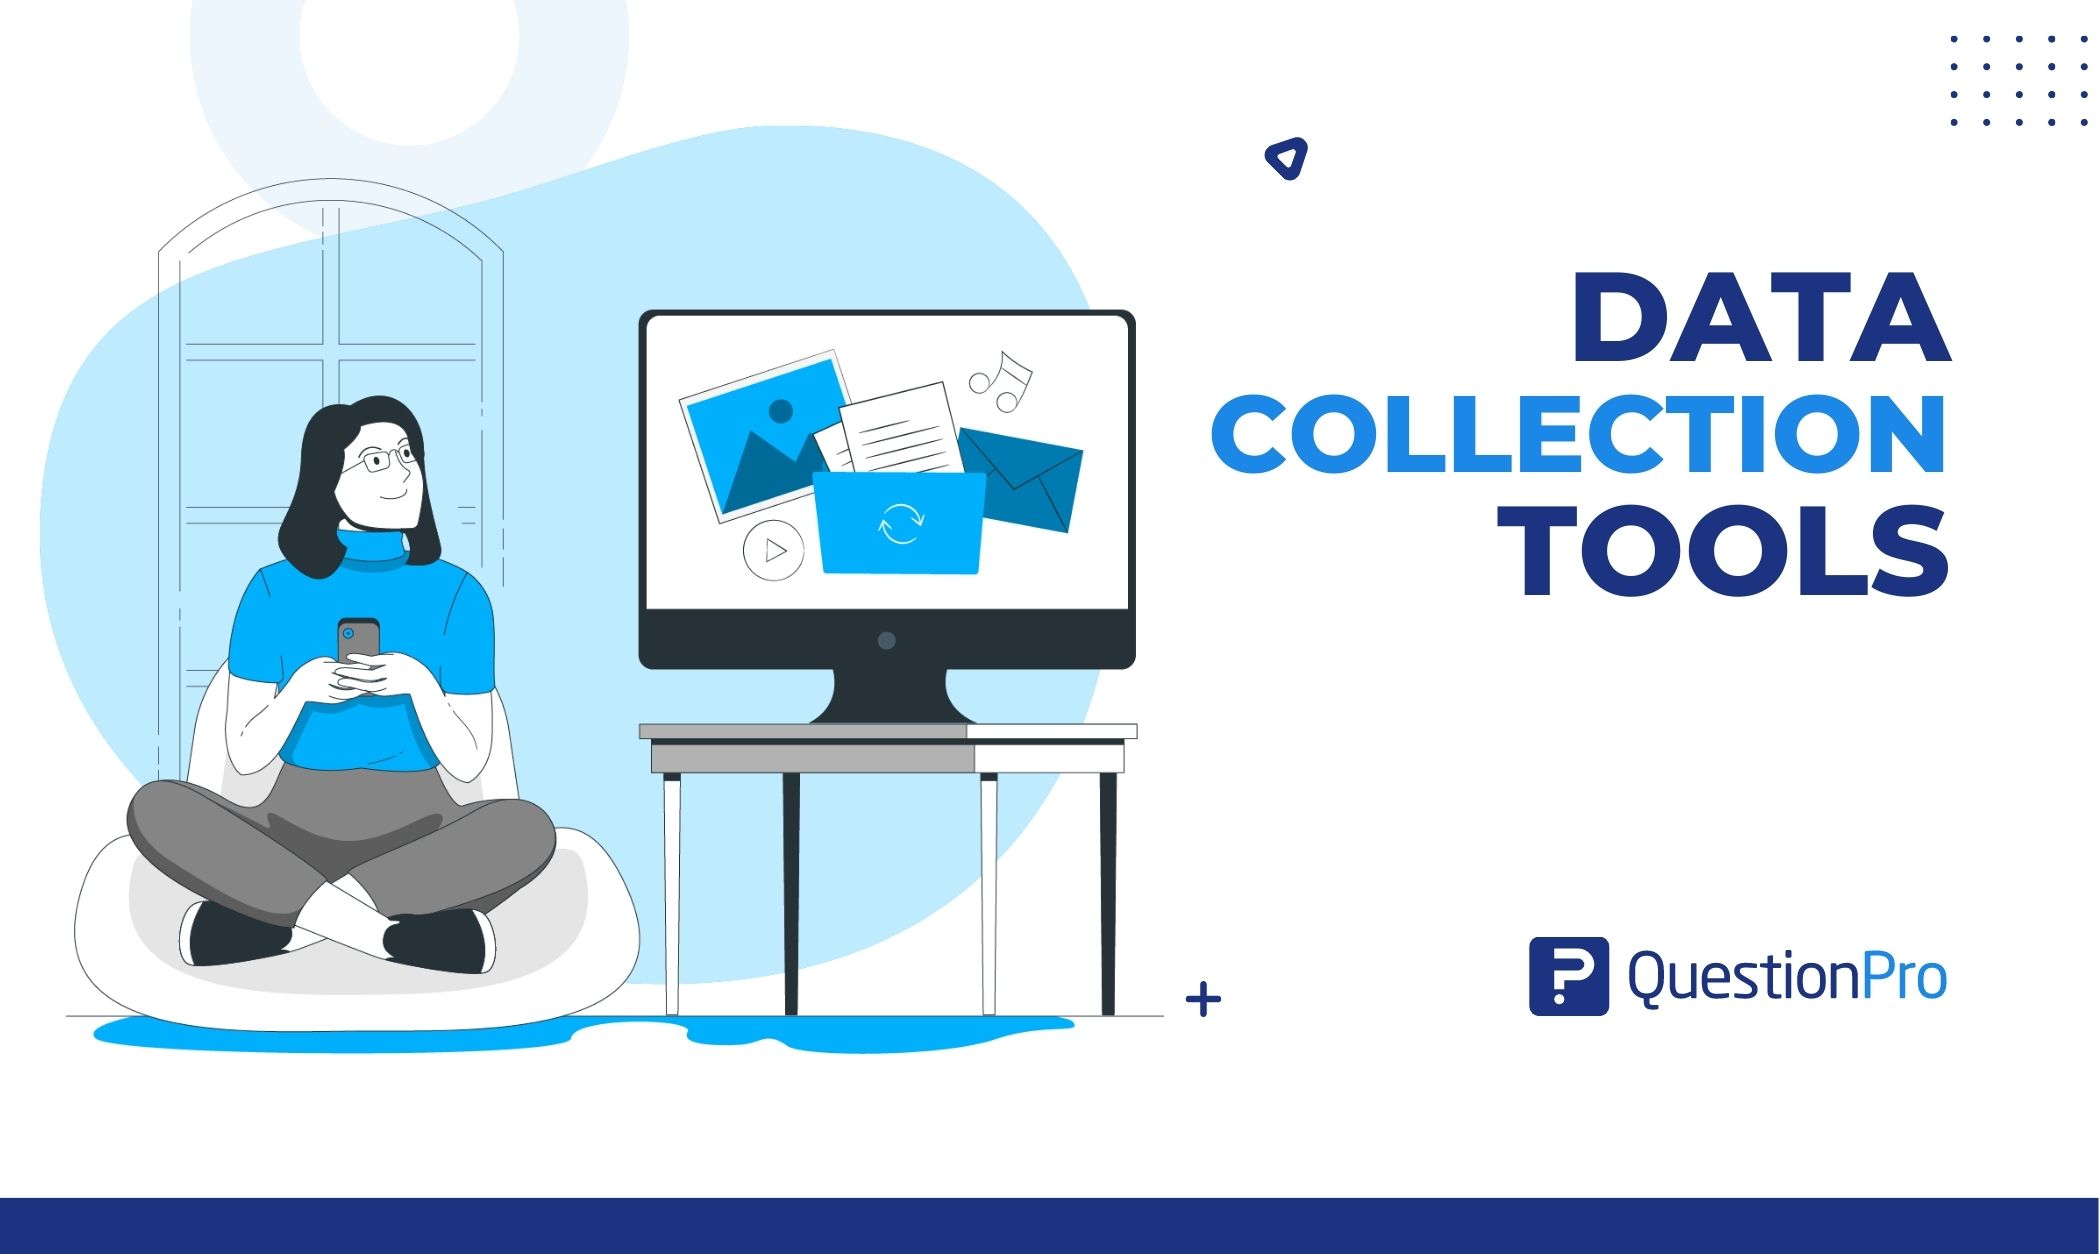 Data collection tools help collect and analyze data. Explore the 7 best data collection tools. Find the best one for your business in 2023.